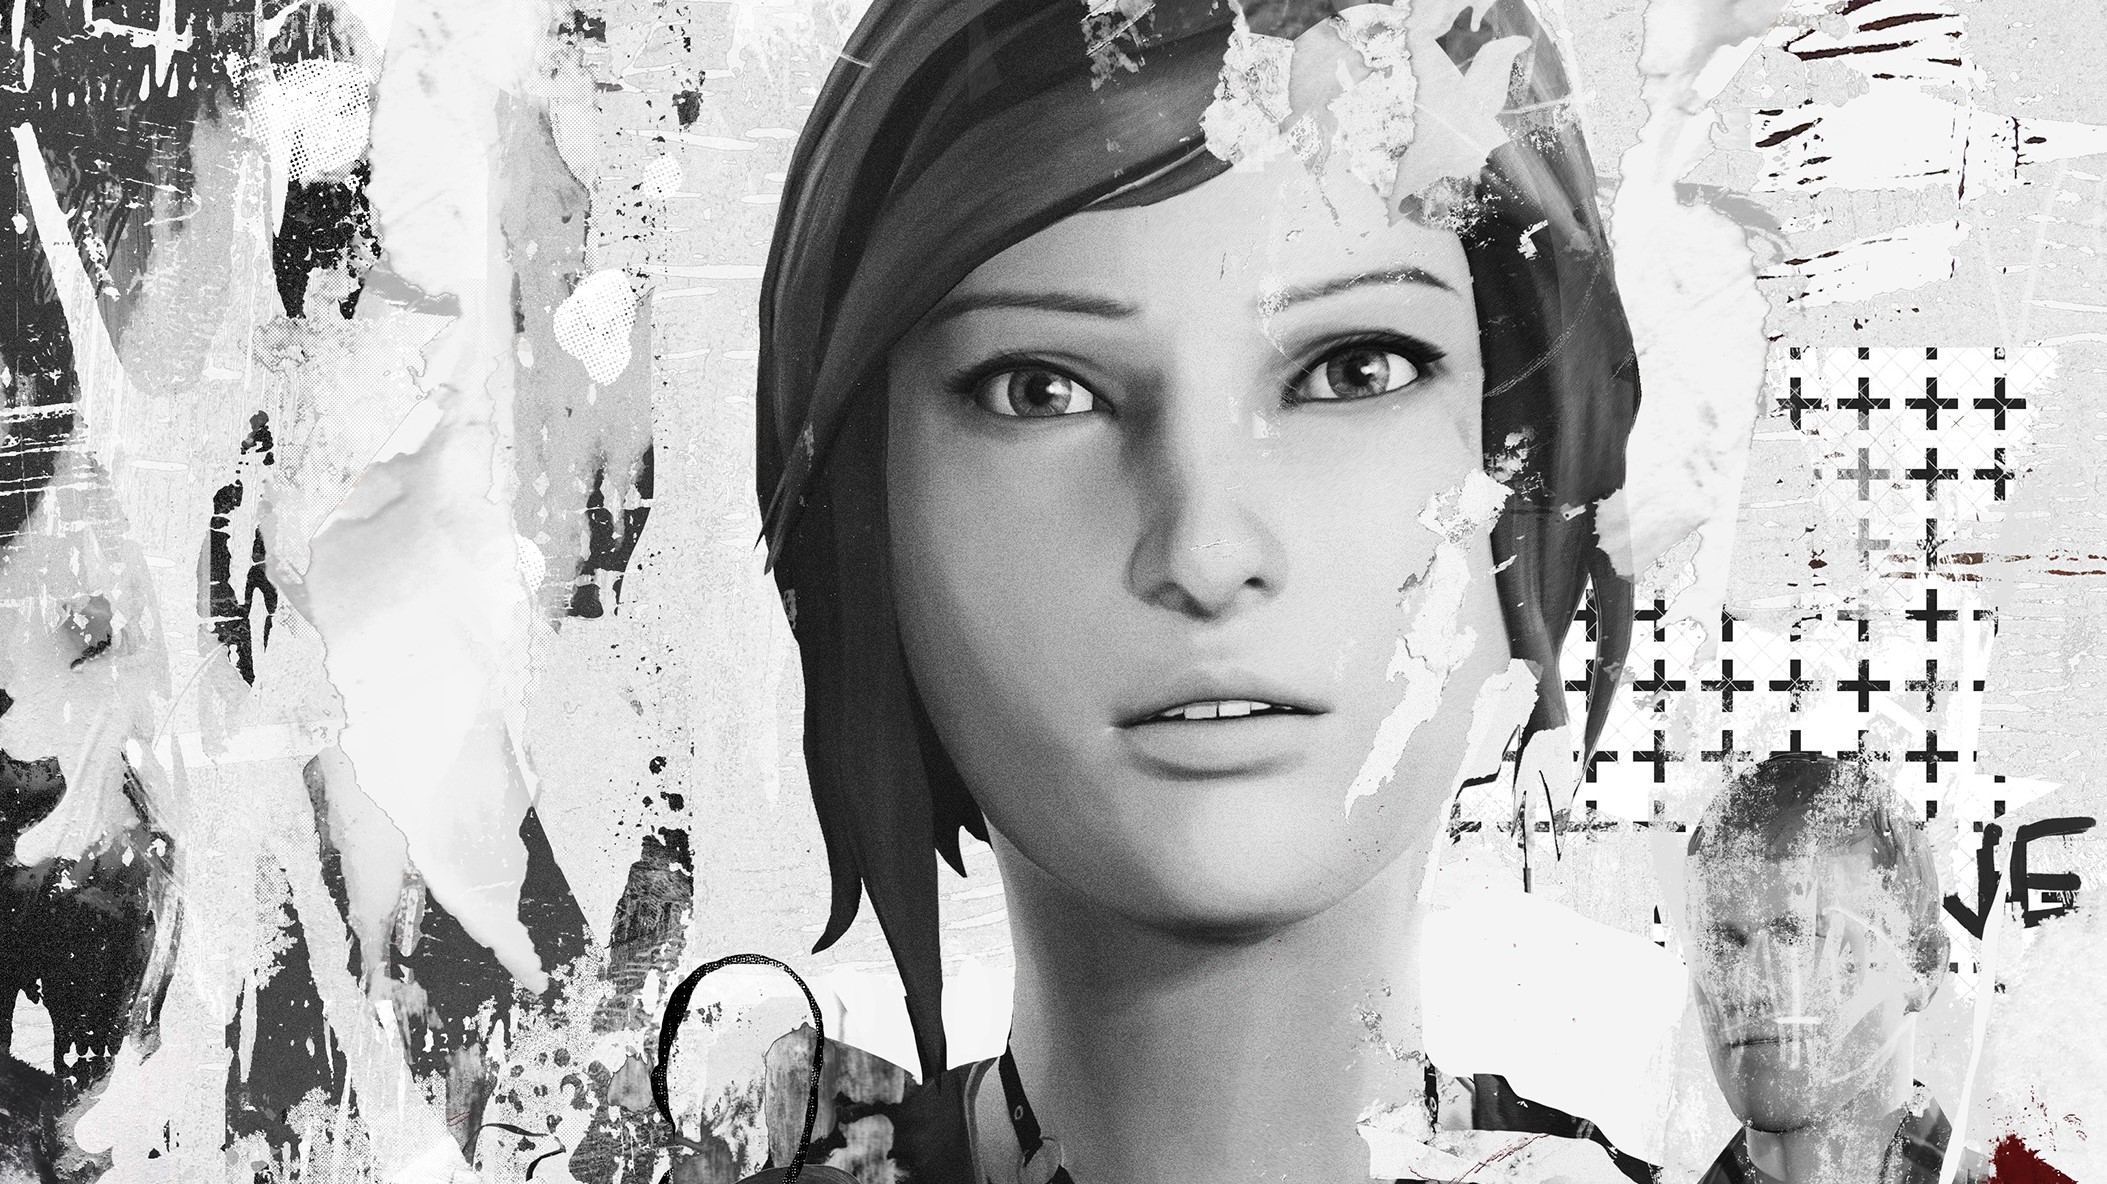 Life is Strange: Before the Storm on